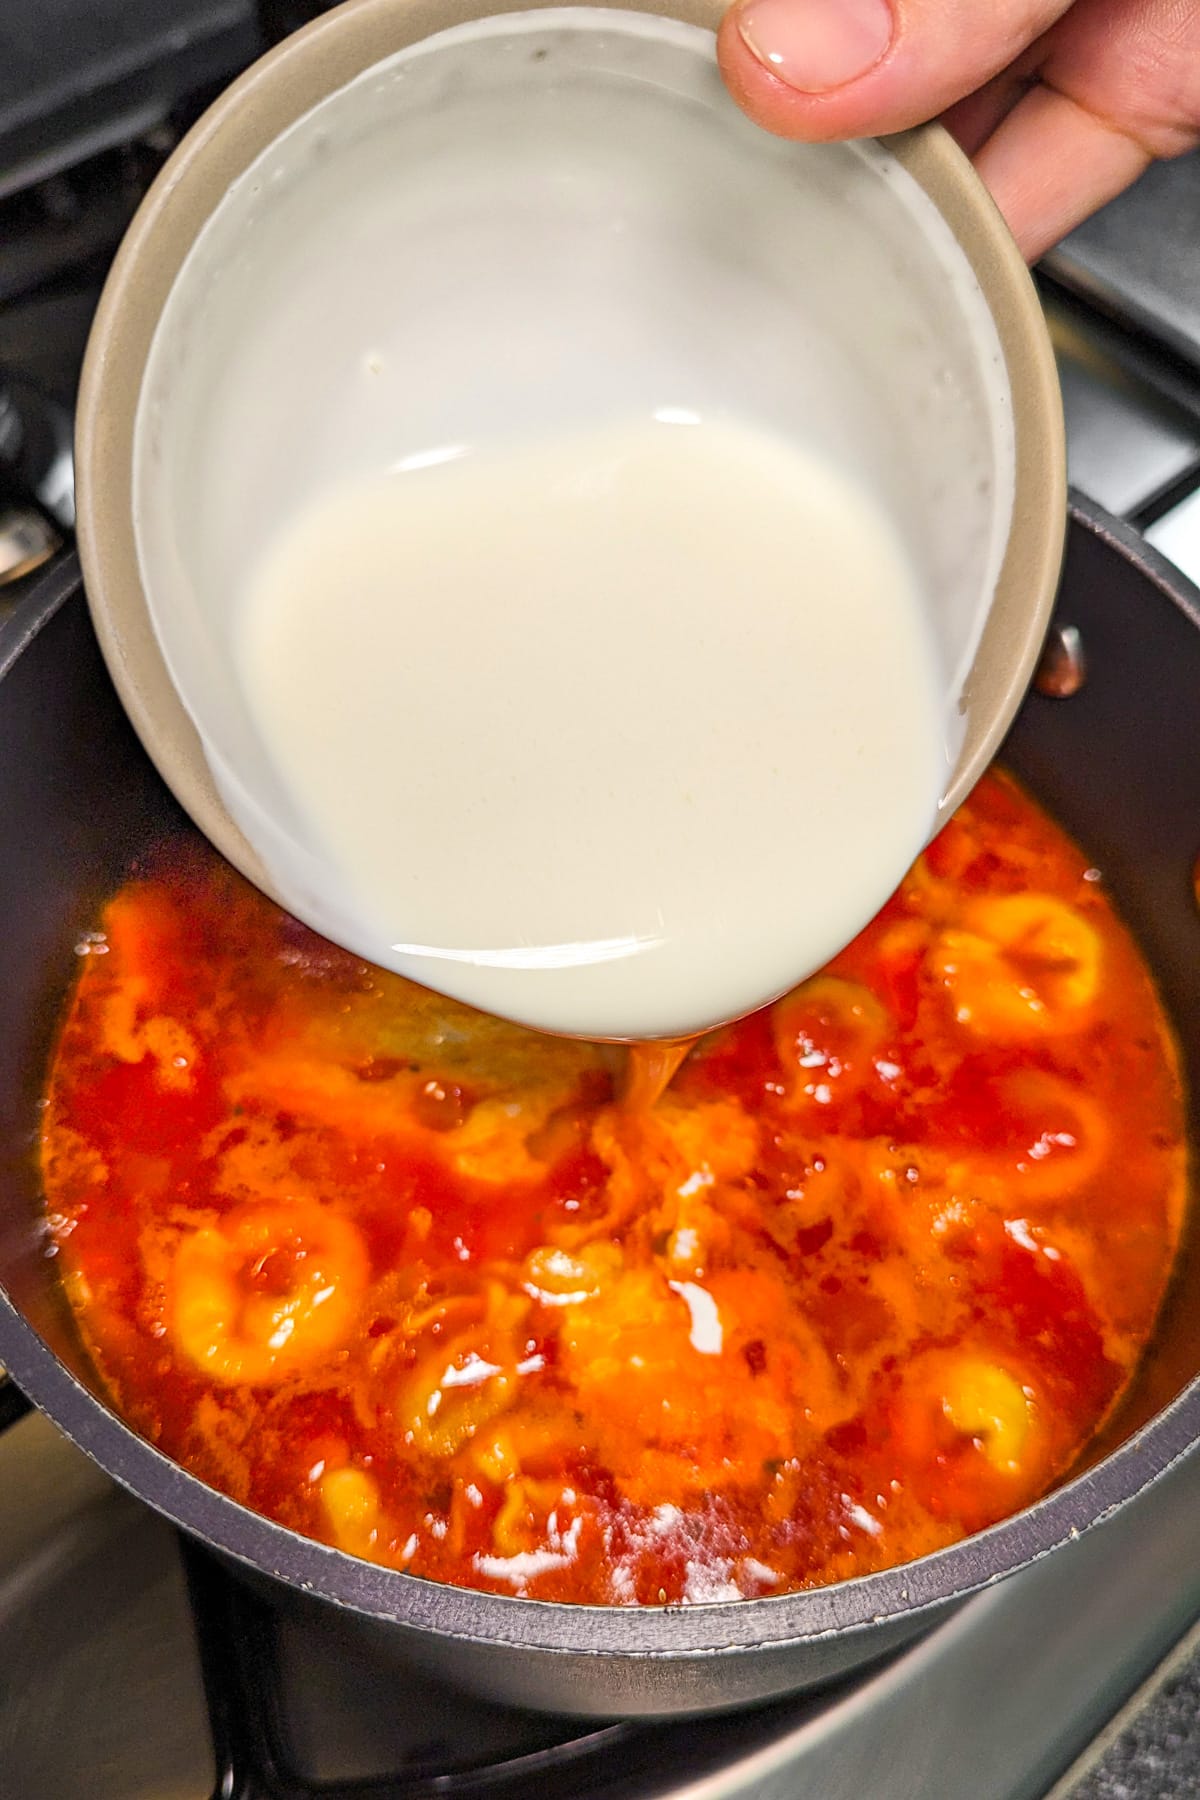 Pouring cream over a tomato soup in a pan on the stove.